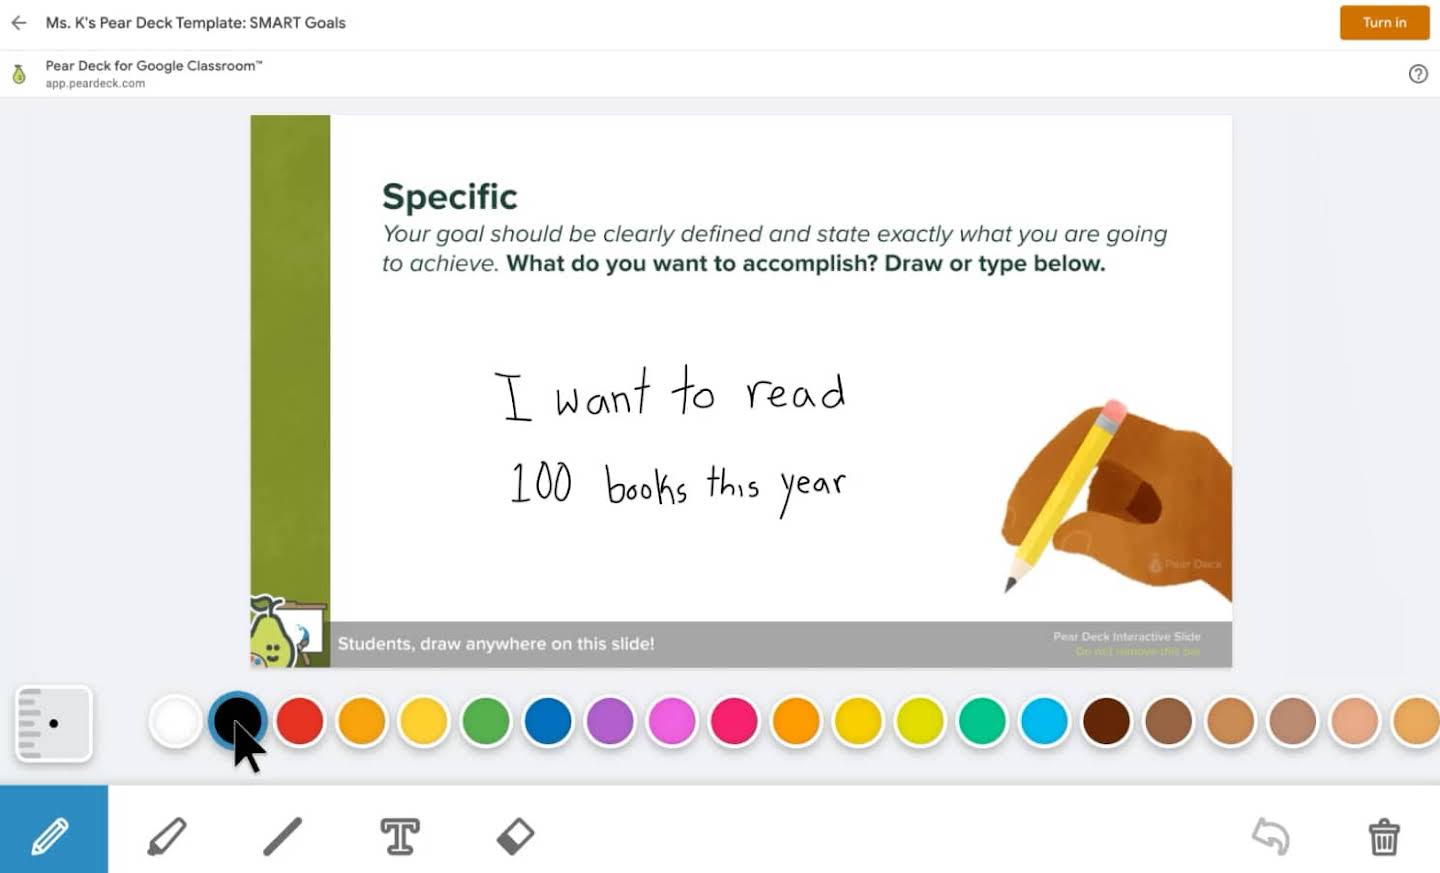 A screenshot of Pear Deck shows how a student can handwrite an answer straight in the app. The question “What do you want to accomplish this year?” is answered with “I want to read 100 books this year.”